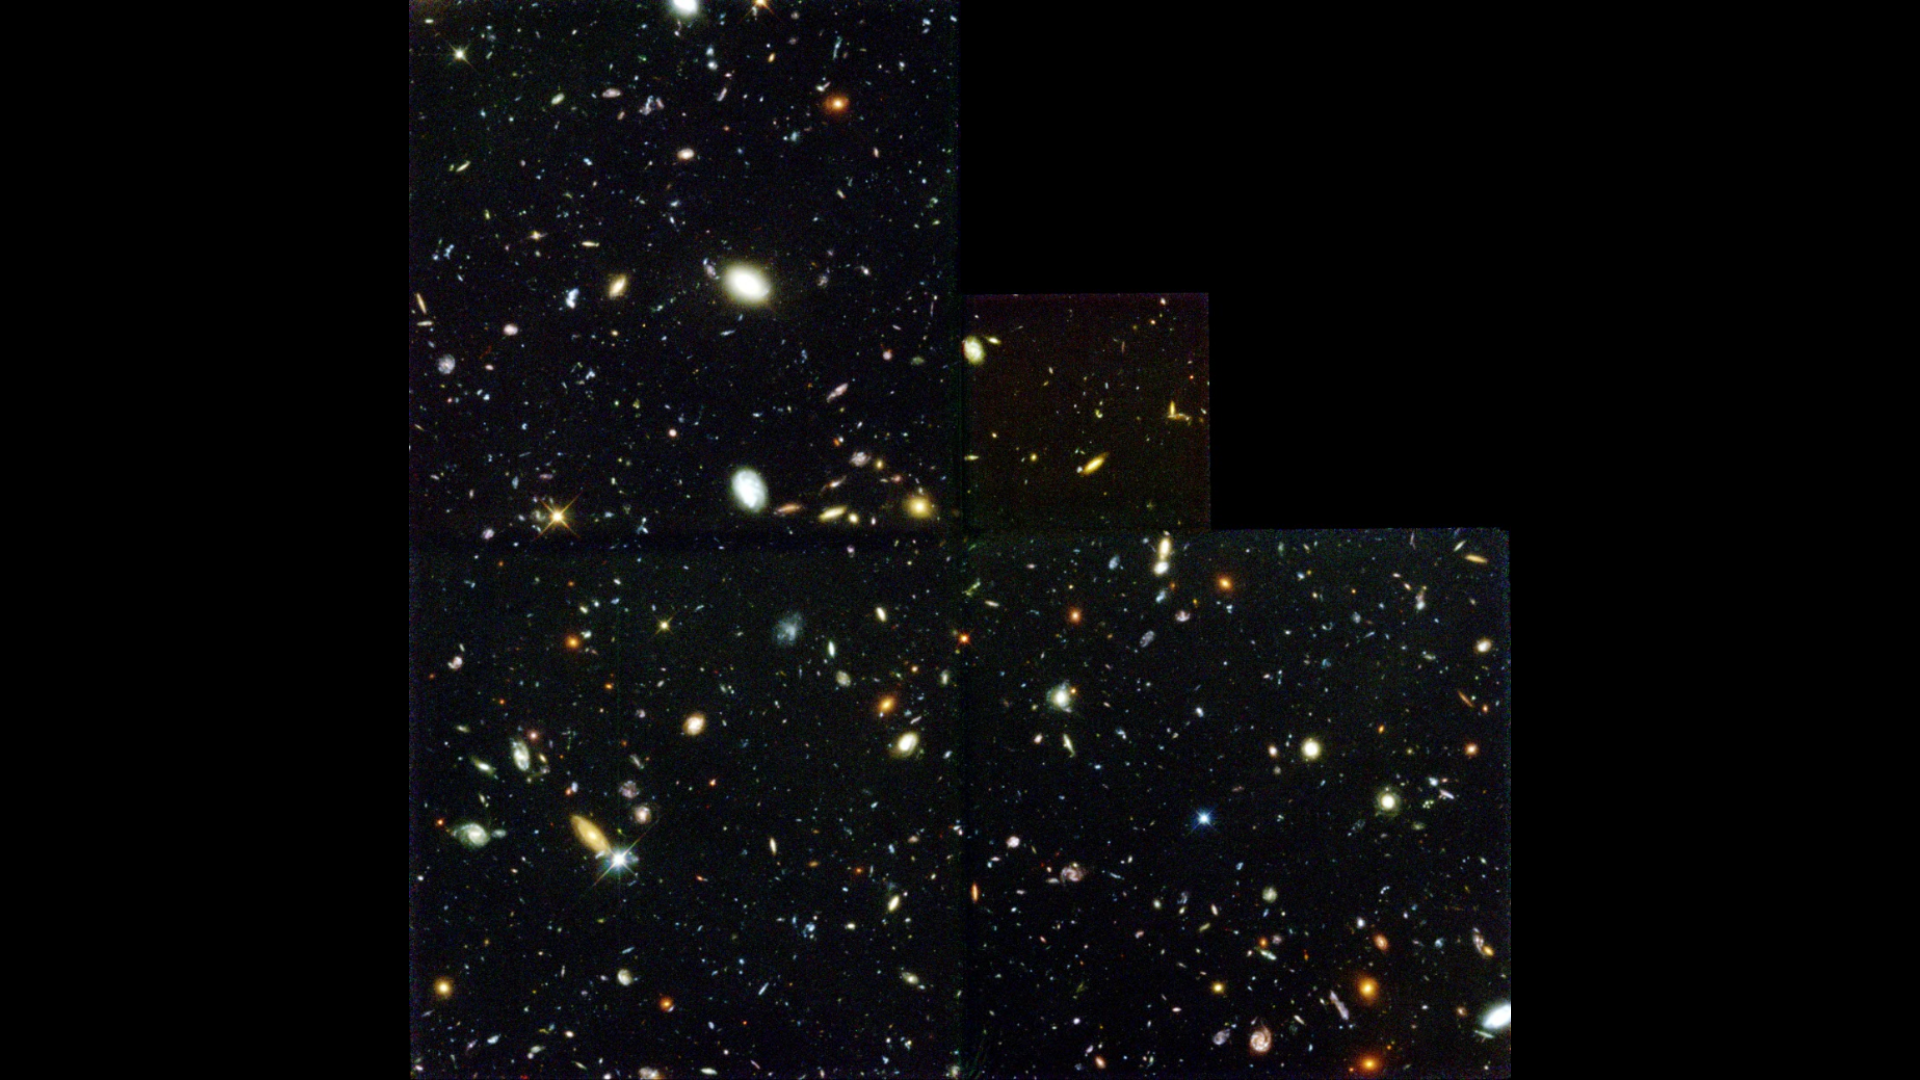 Credit:R. Williams (STScI), the Hubble Deep Field Team and NASA